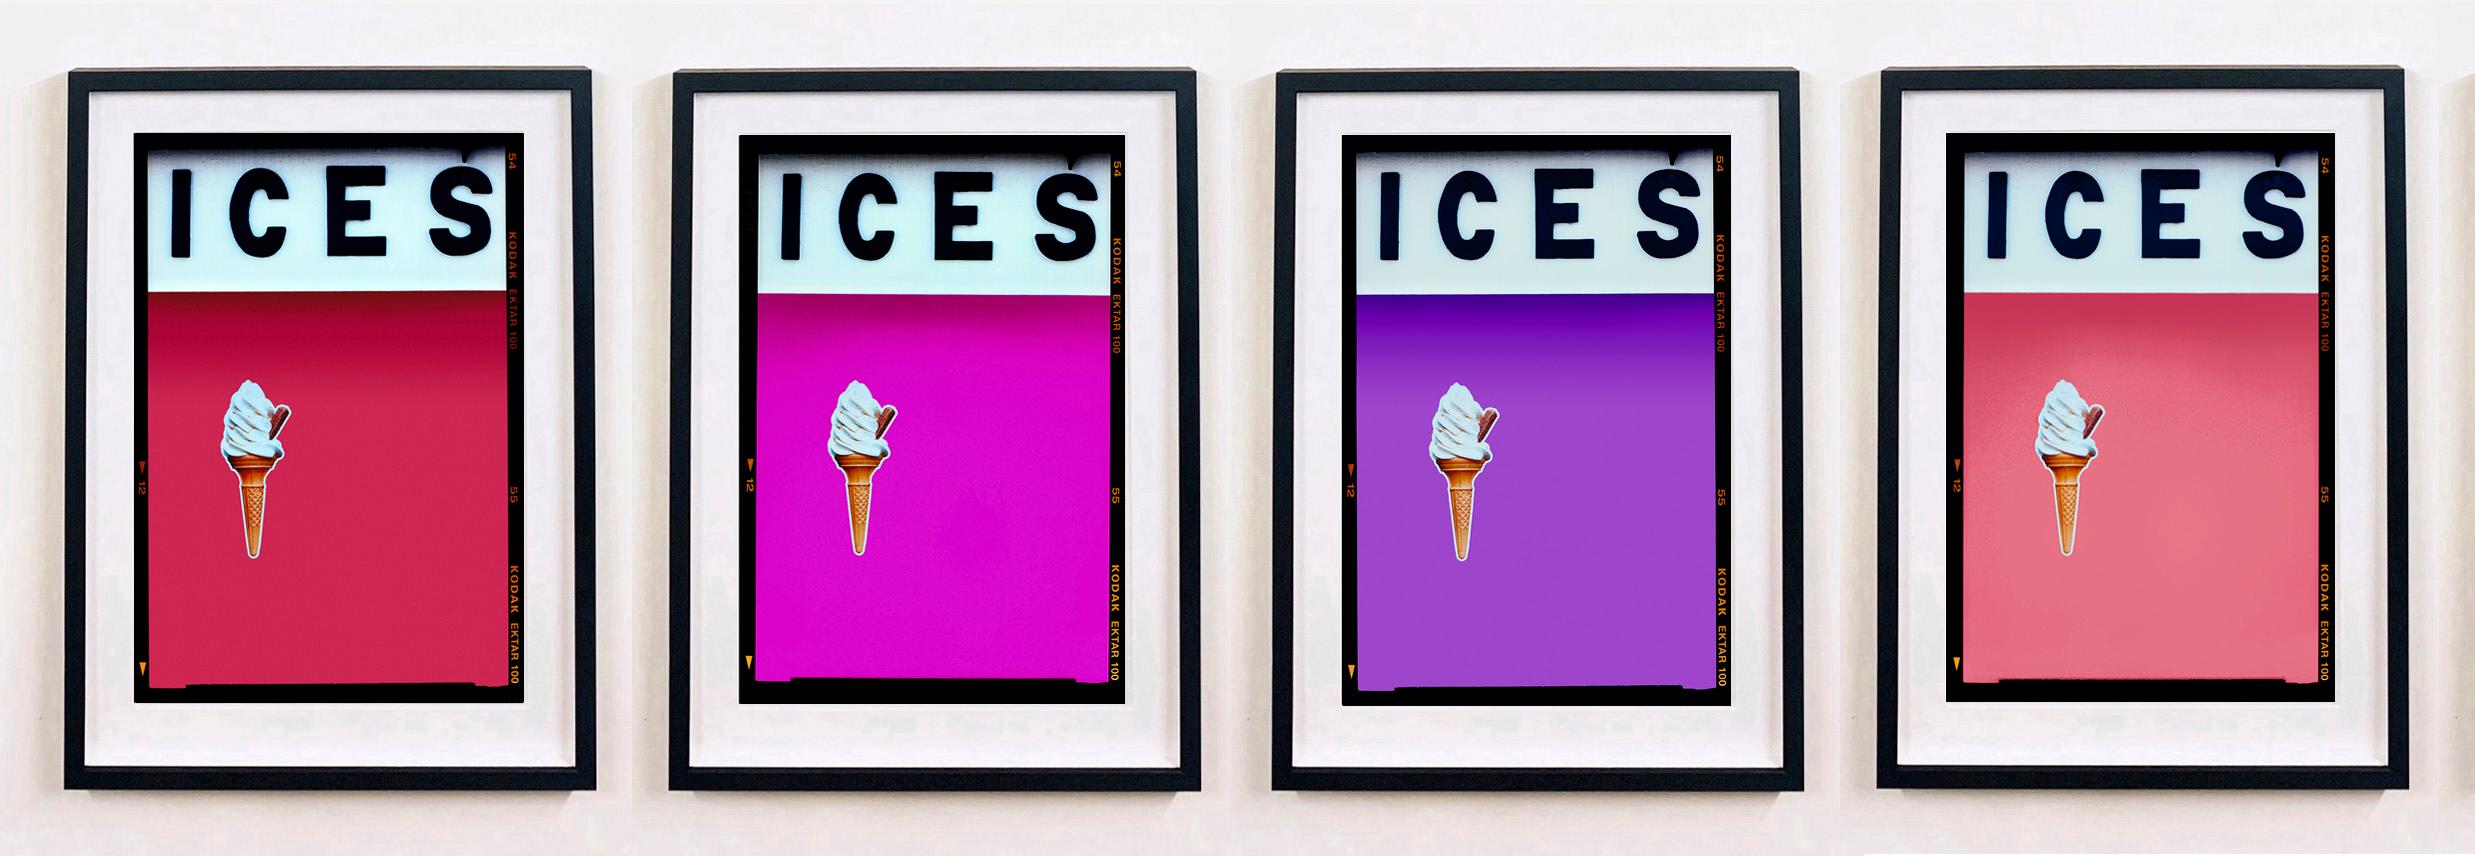 Ices (Raspberry), Bexhill-on-Sea - British seaside color photography For Sale 4